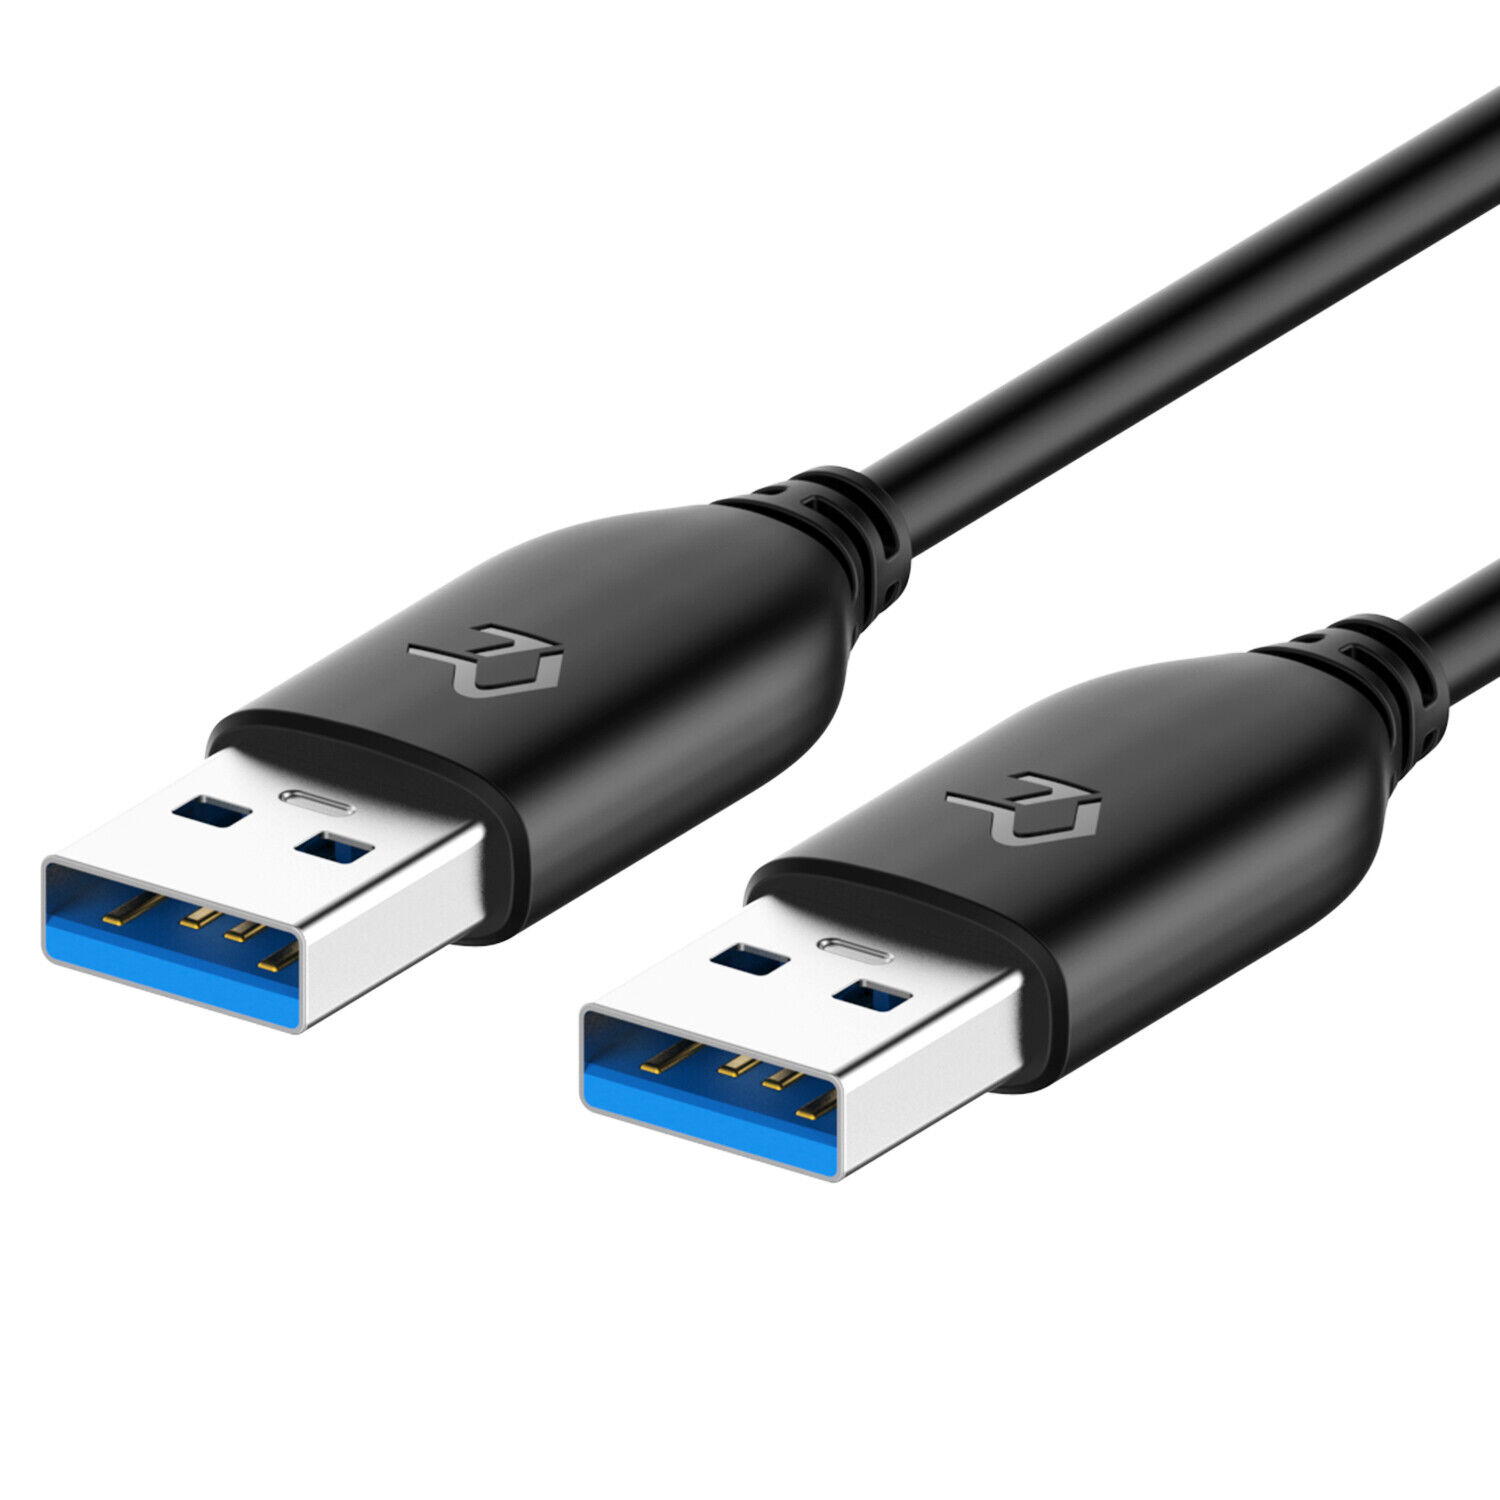 Rankie USB 3.0 Cable Type A to Type A Cable 6/10/15 Feet Black